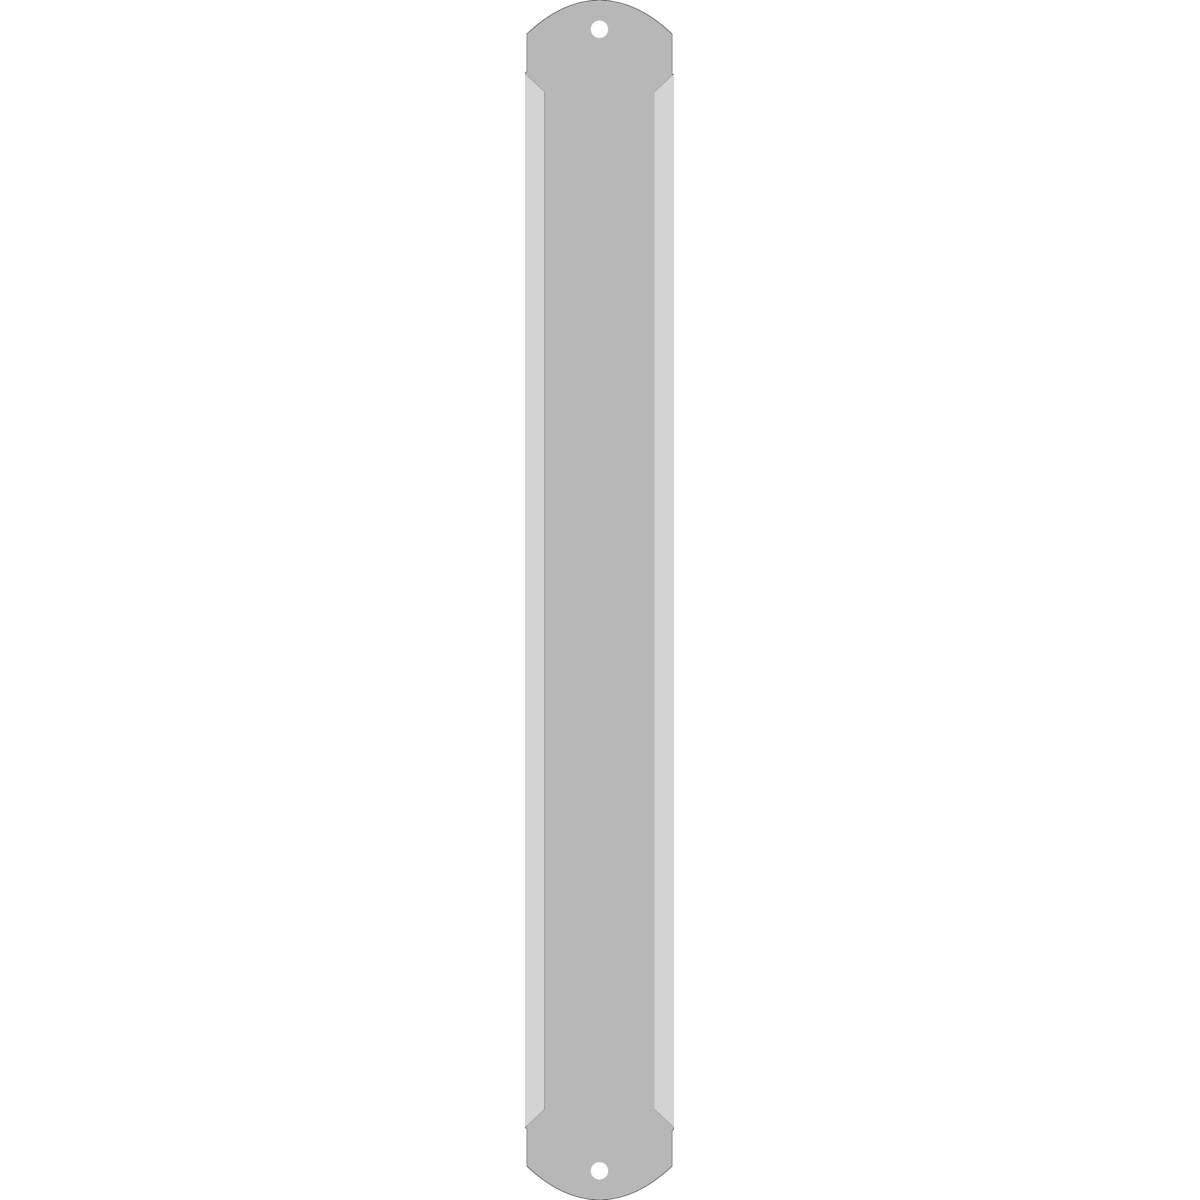 1" Vertical Character Aluminum Holder - Fits 4 Characters